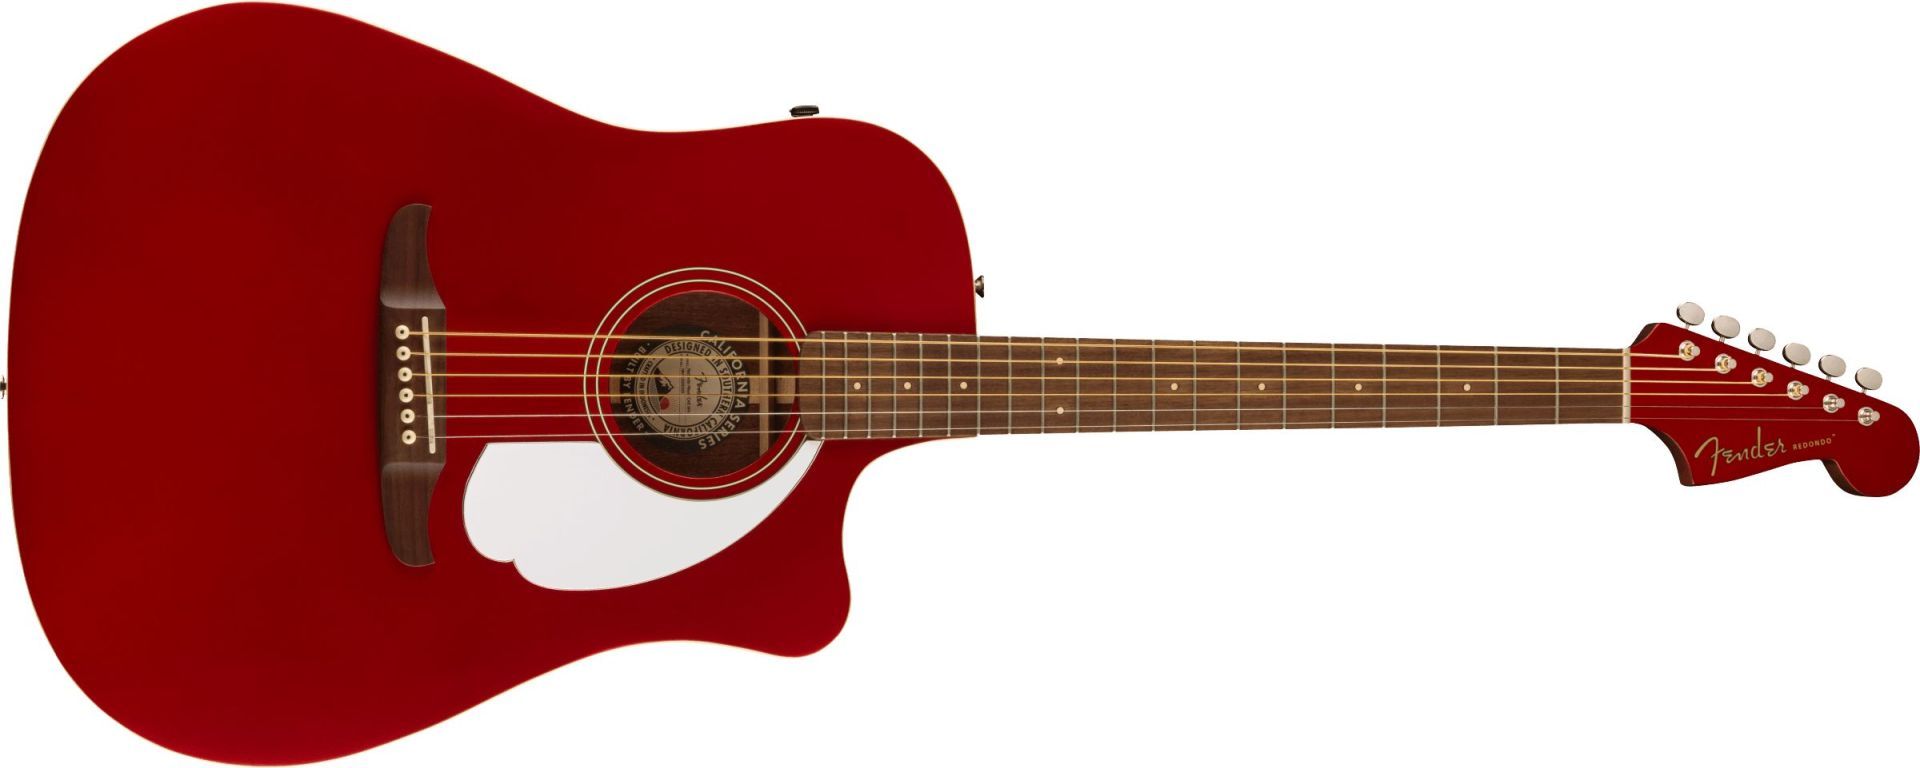 Fender Redondo Player Candy Apple Red